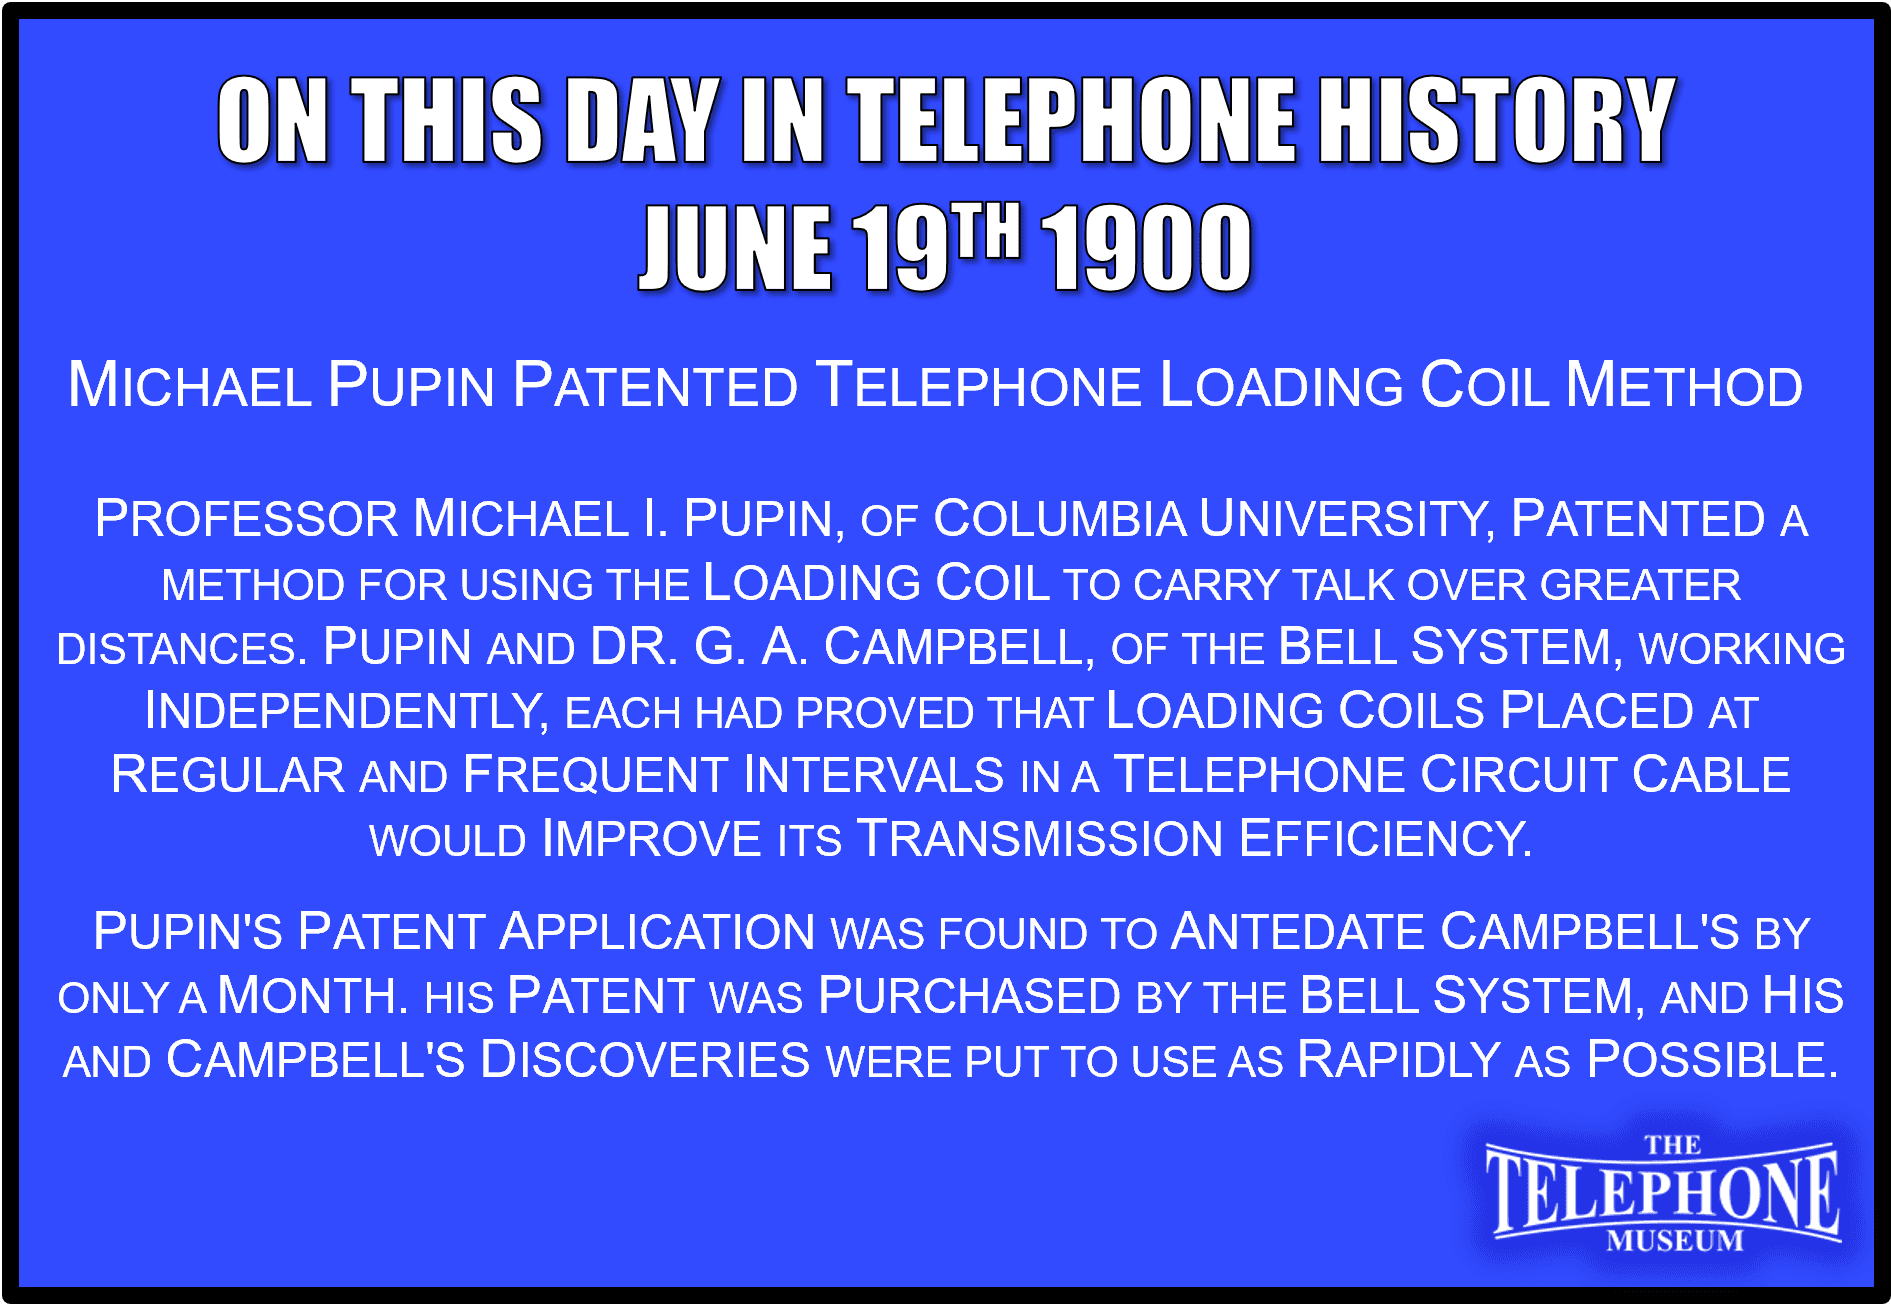 On This Day in Telephone History June 19TH 1900 Prof. Michael I. Pupin, of Columbia University, patented a method for using the loading coil to carry talk over greater distances. Pupin and Dr. G. A. Campbell, of the Bell System, working independently, each had proved that loading coils placed at regular and frequent intervals in a telephone Circuit, particularly a circuit in a cable, would improve its transmission efficiency. Pupin's patent application was found to antedate Campbell's by only a month. His patent was purchased by the Bell System, and his and Campbell's discoveries were put to use as rapidly as possible.